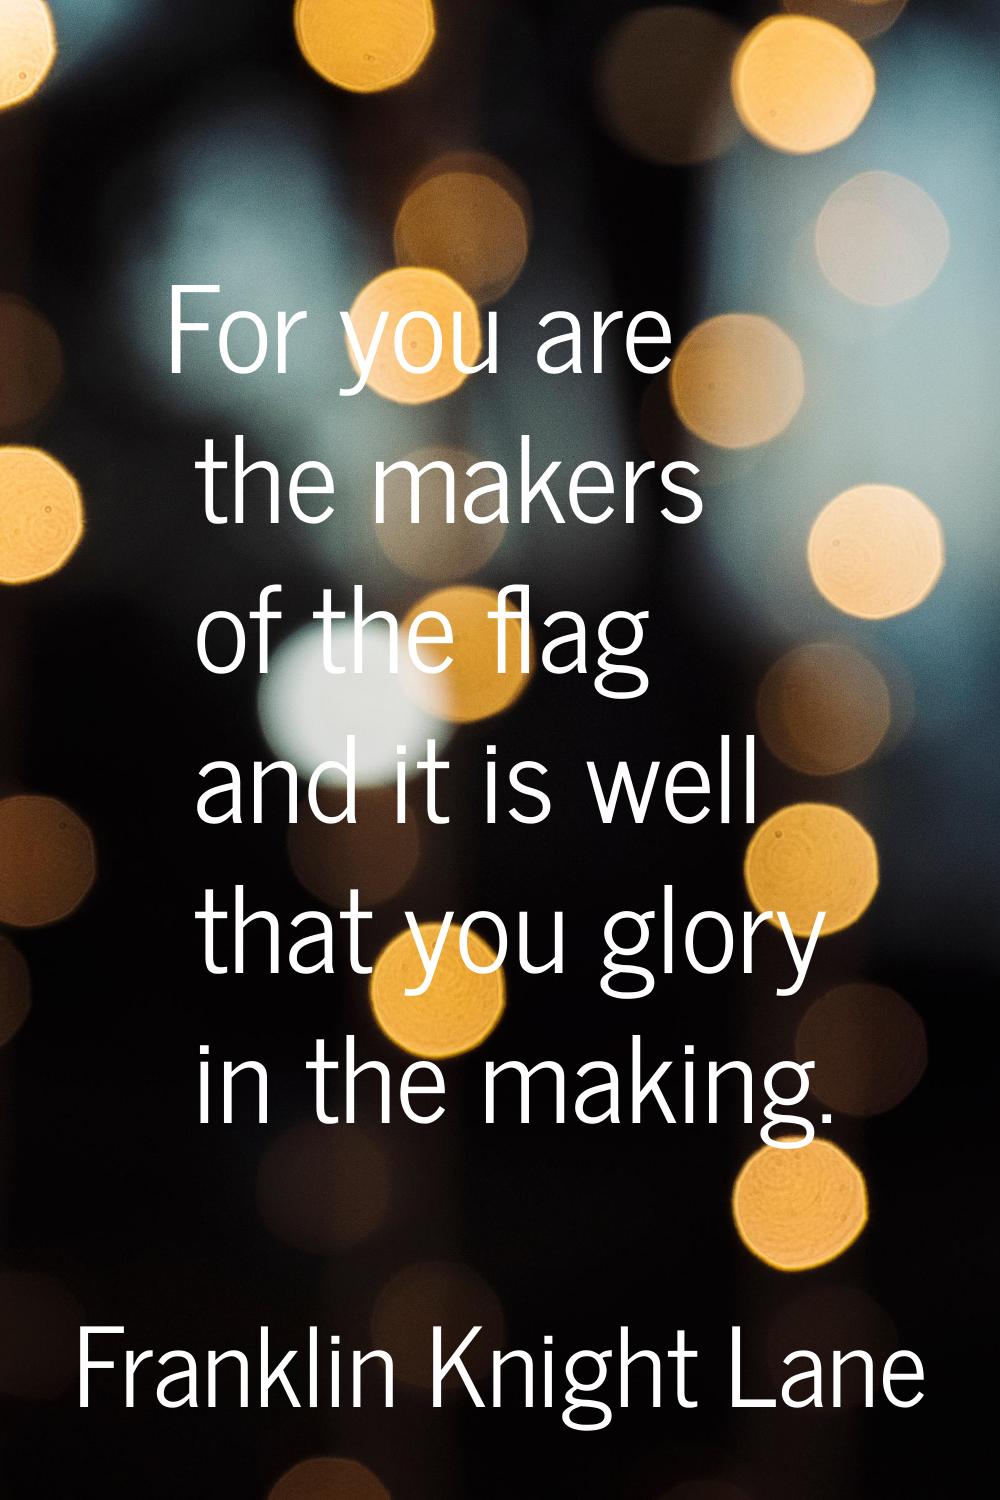 For you are the makers of the flag and it is well that you glory in the making.